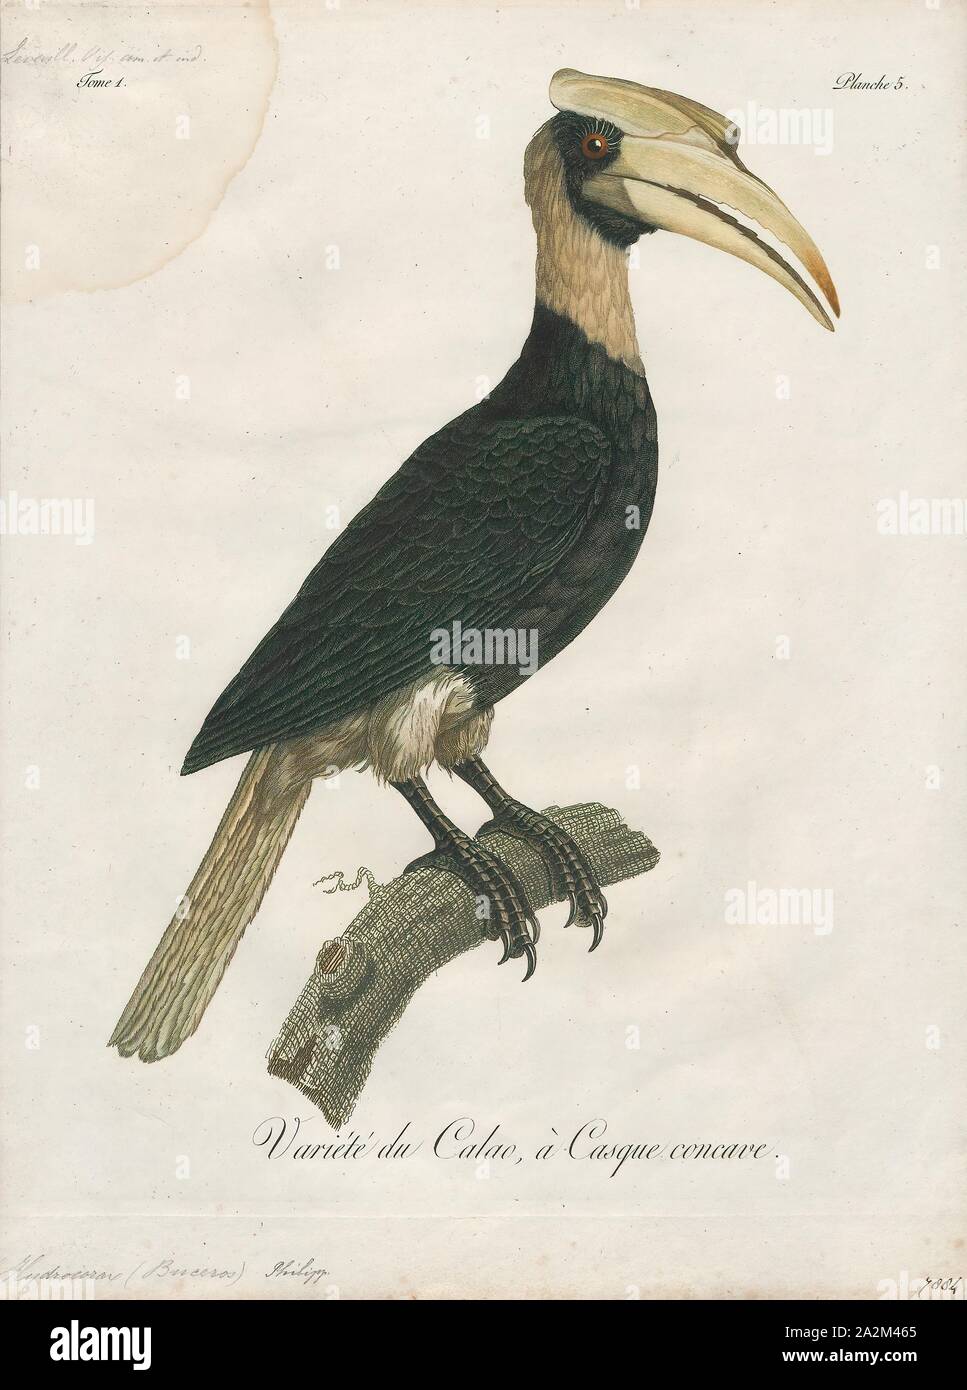 Buceros hydrocorax, Print, The rufous hornbill (Buceros hydrocorax), also known as the Philippine hornbill and locally as kalaw (pronounced kah-lau), is a large species of hornbill., 1801 Stock Photo